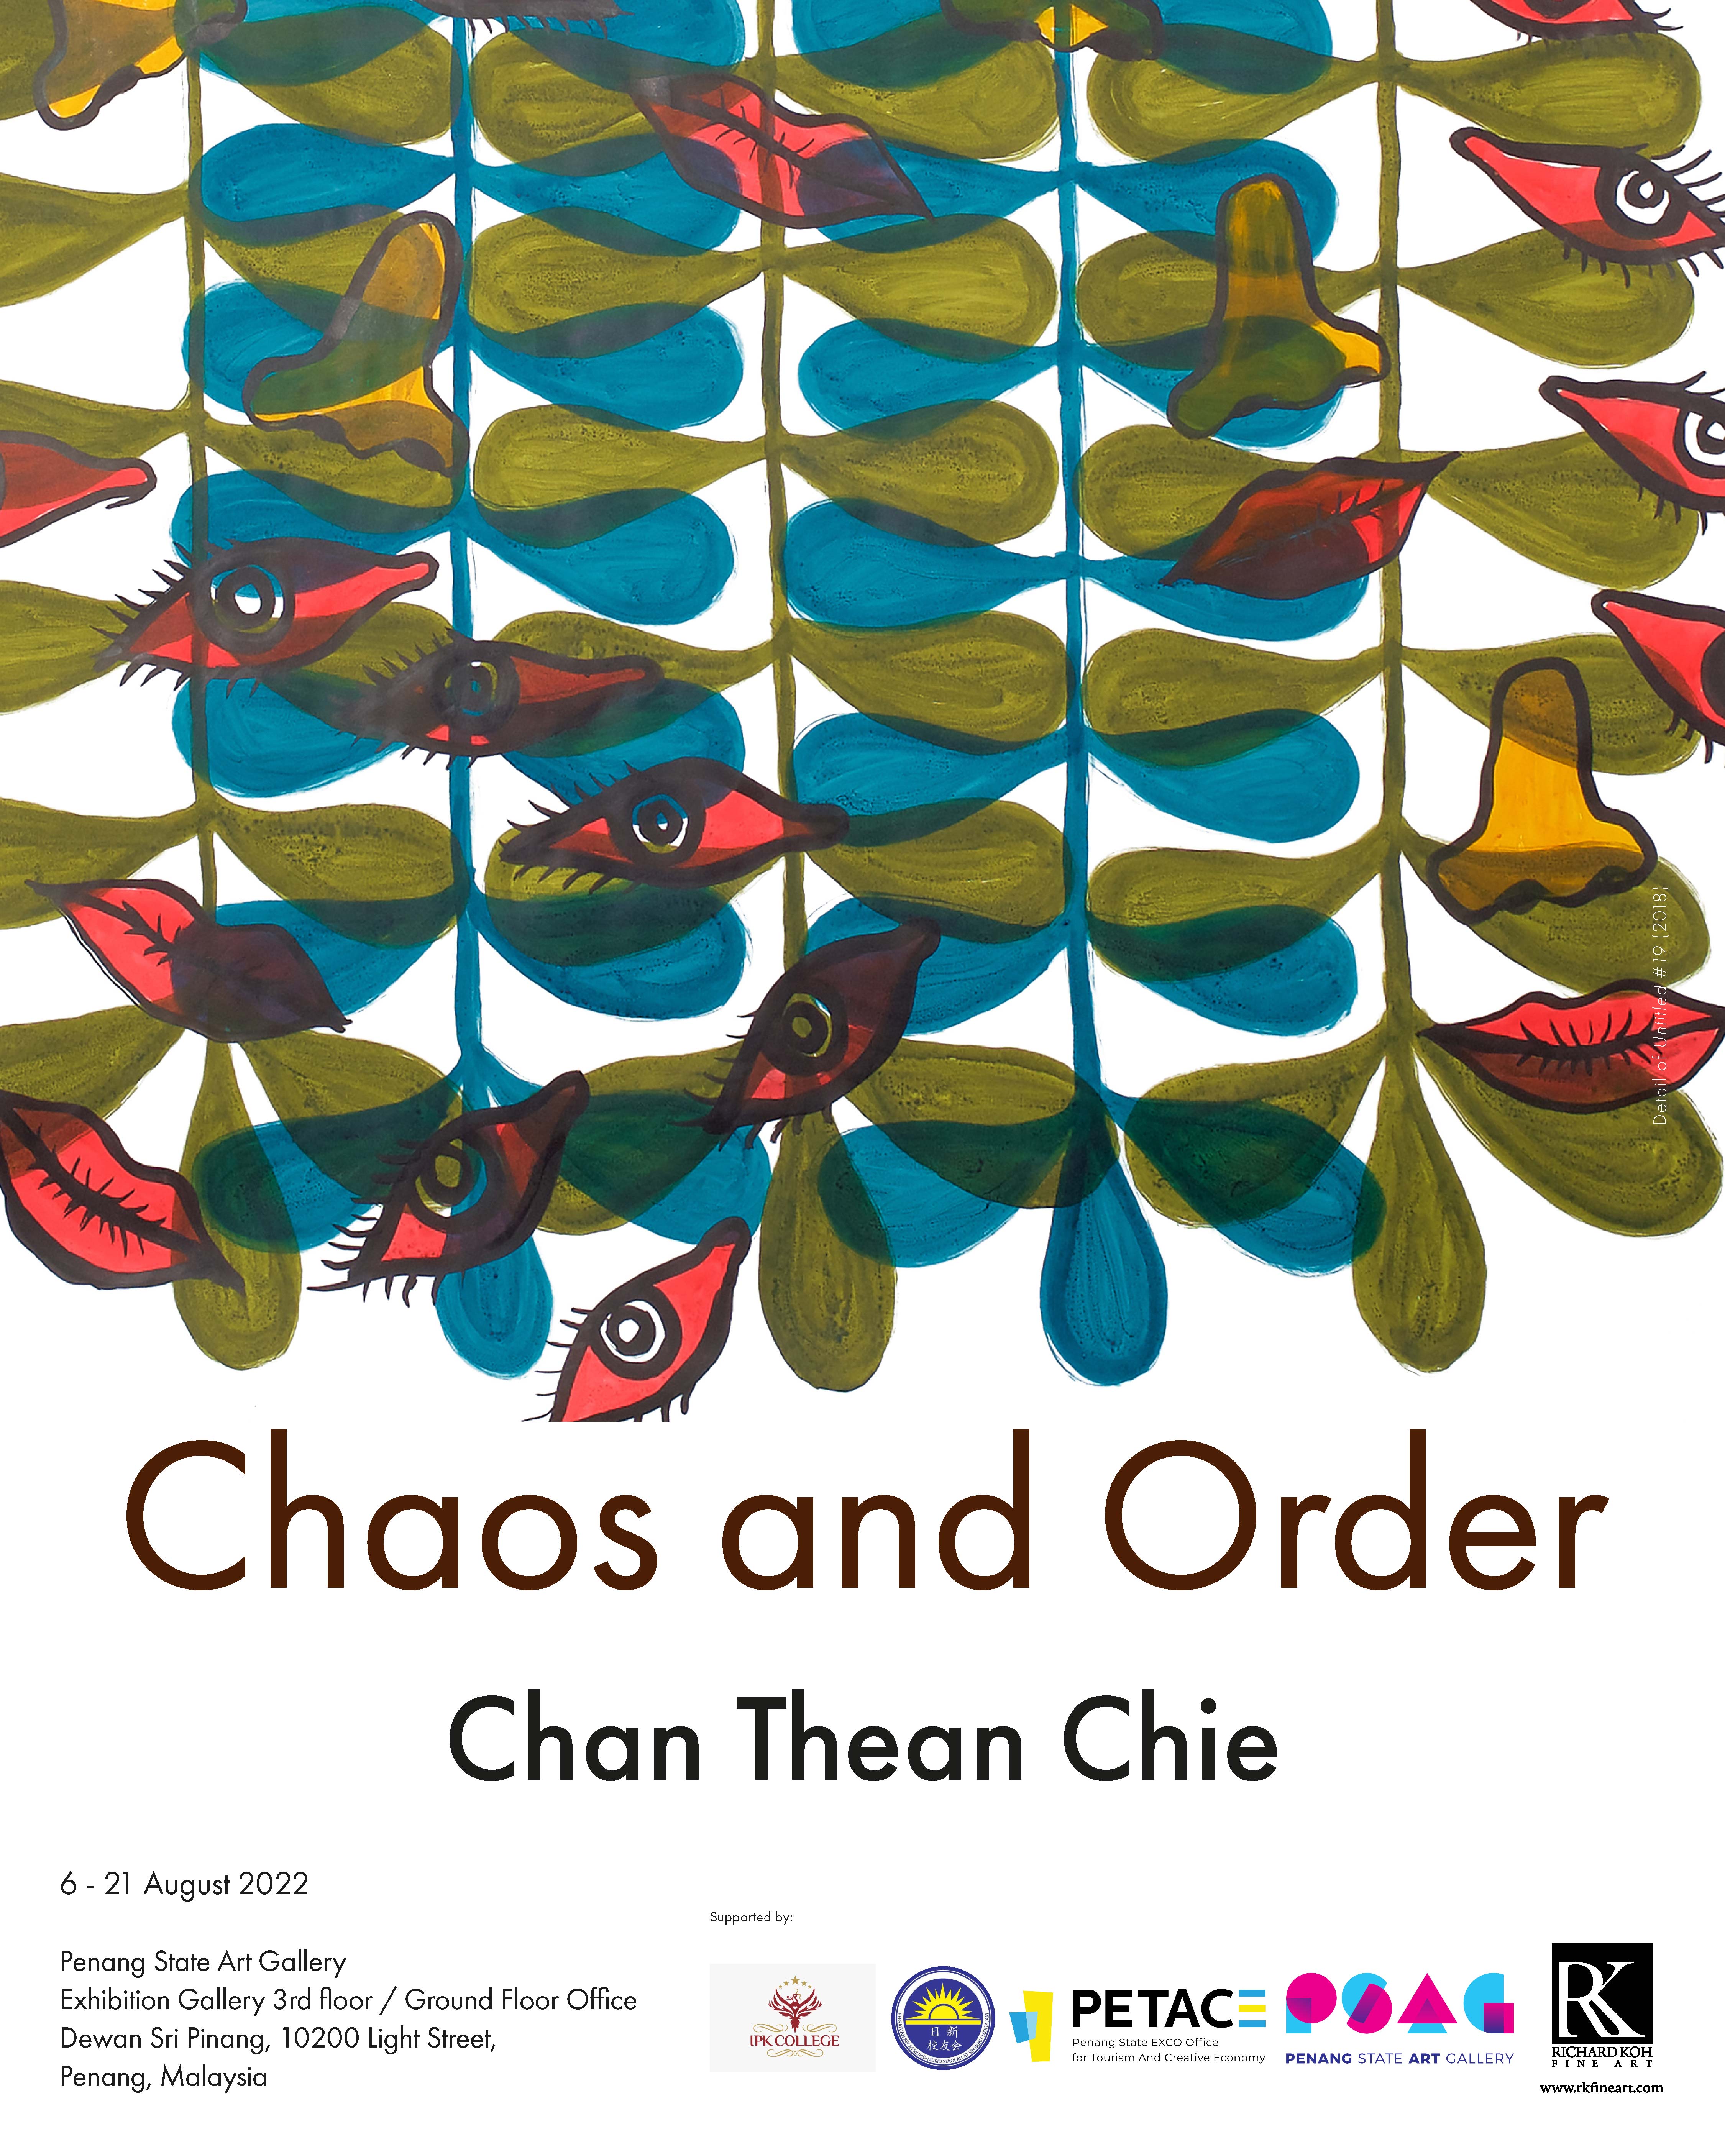   Chan Thean Chie – Chaos and Order